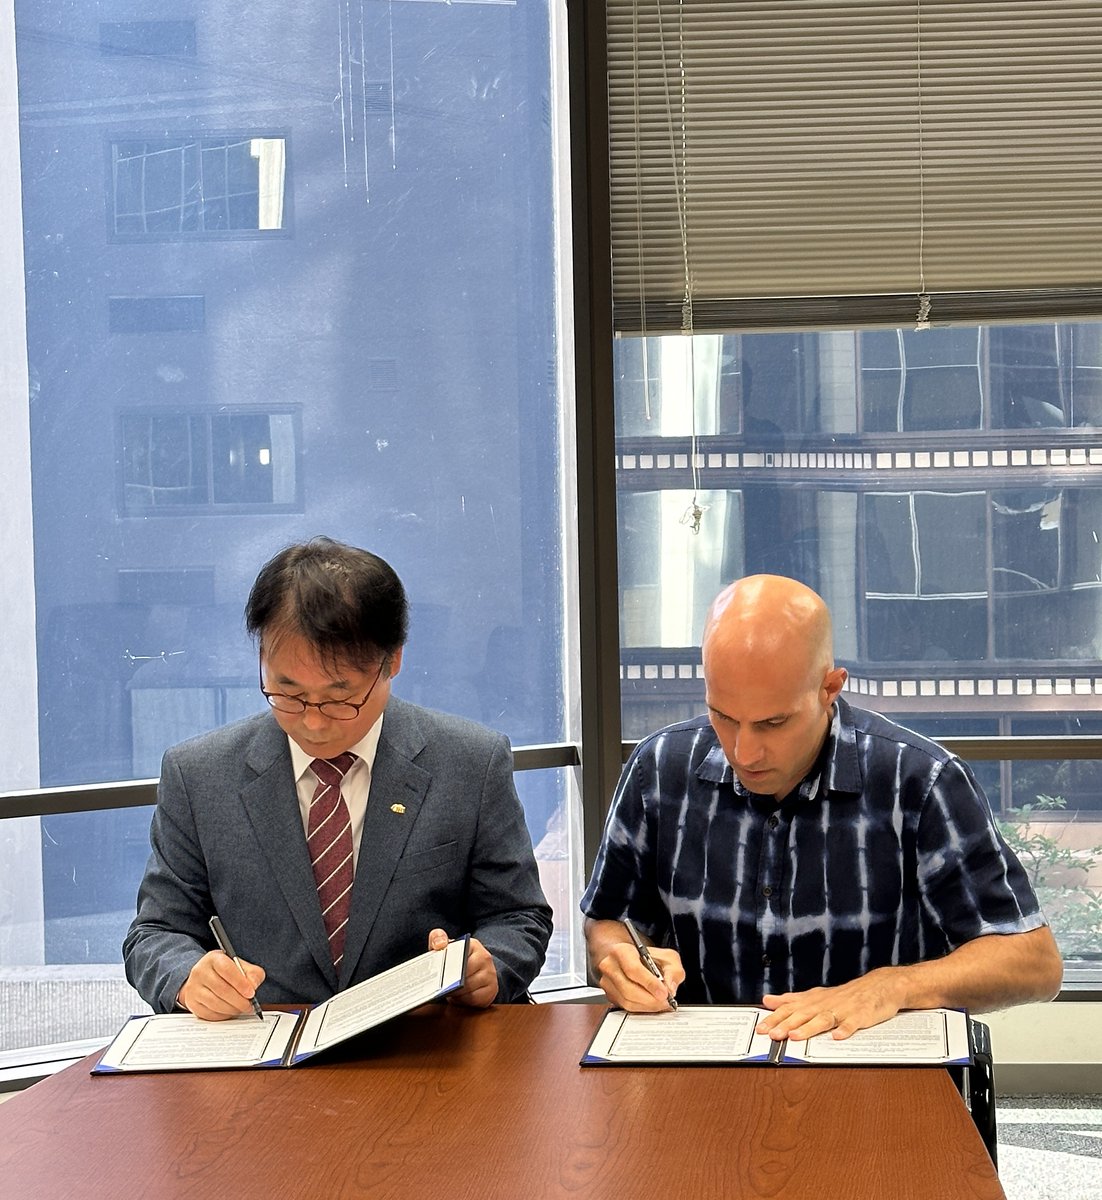 1/ 🤝 Today, we are thrilled to announce the signing of a Memorandum of Understanding (MoU) with the esteemed Jeju Research Institute (jri.re.kr/index.php), represented by Dr. Yang Duksoon, President of JRI, and our President , @DavidSantoro1.